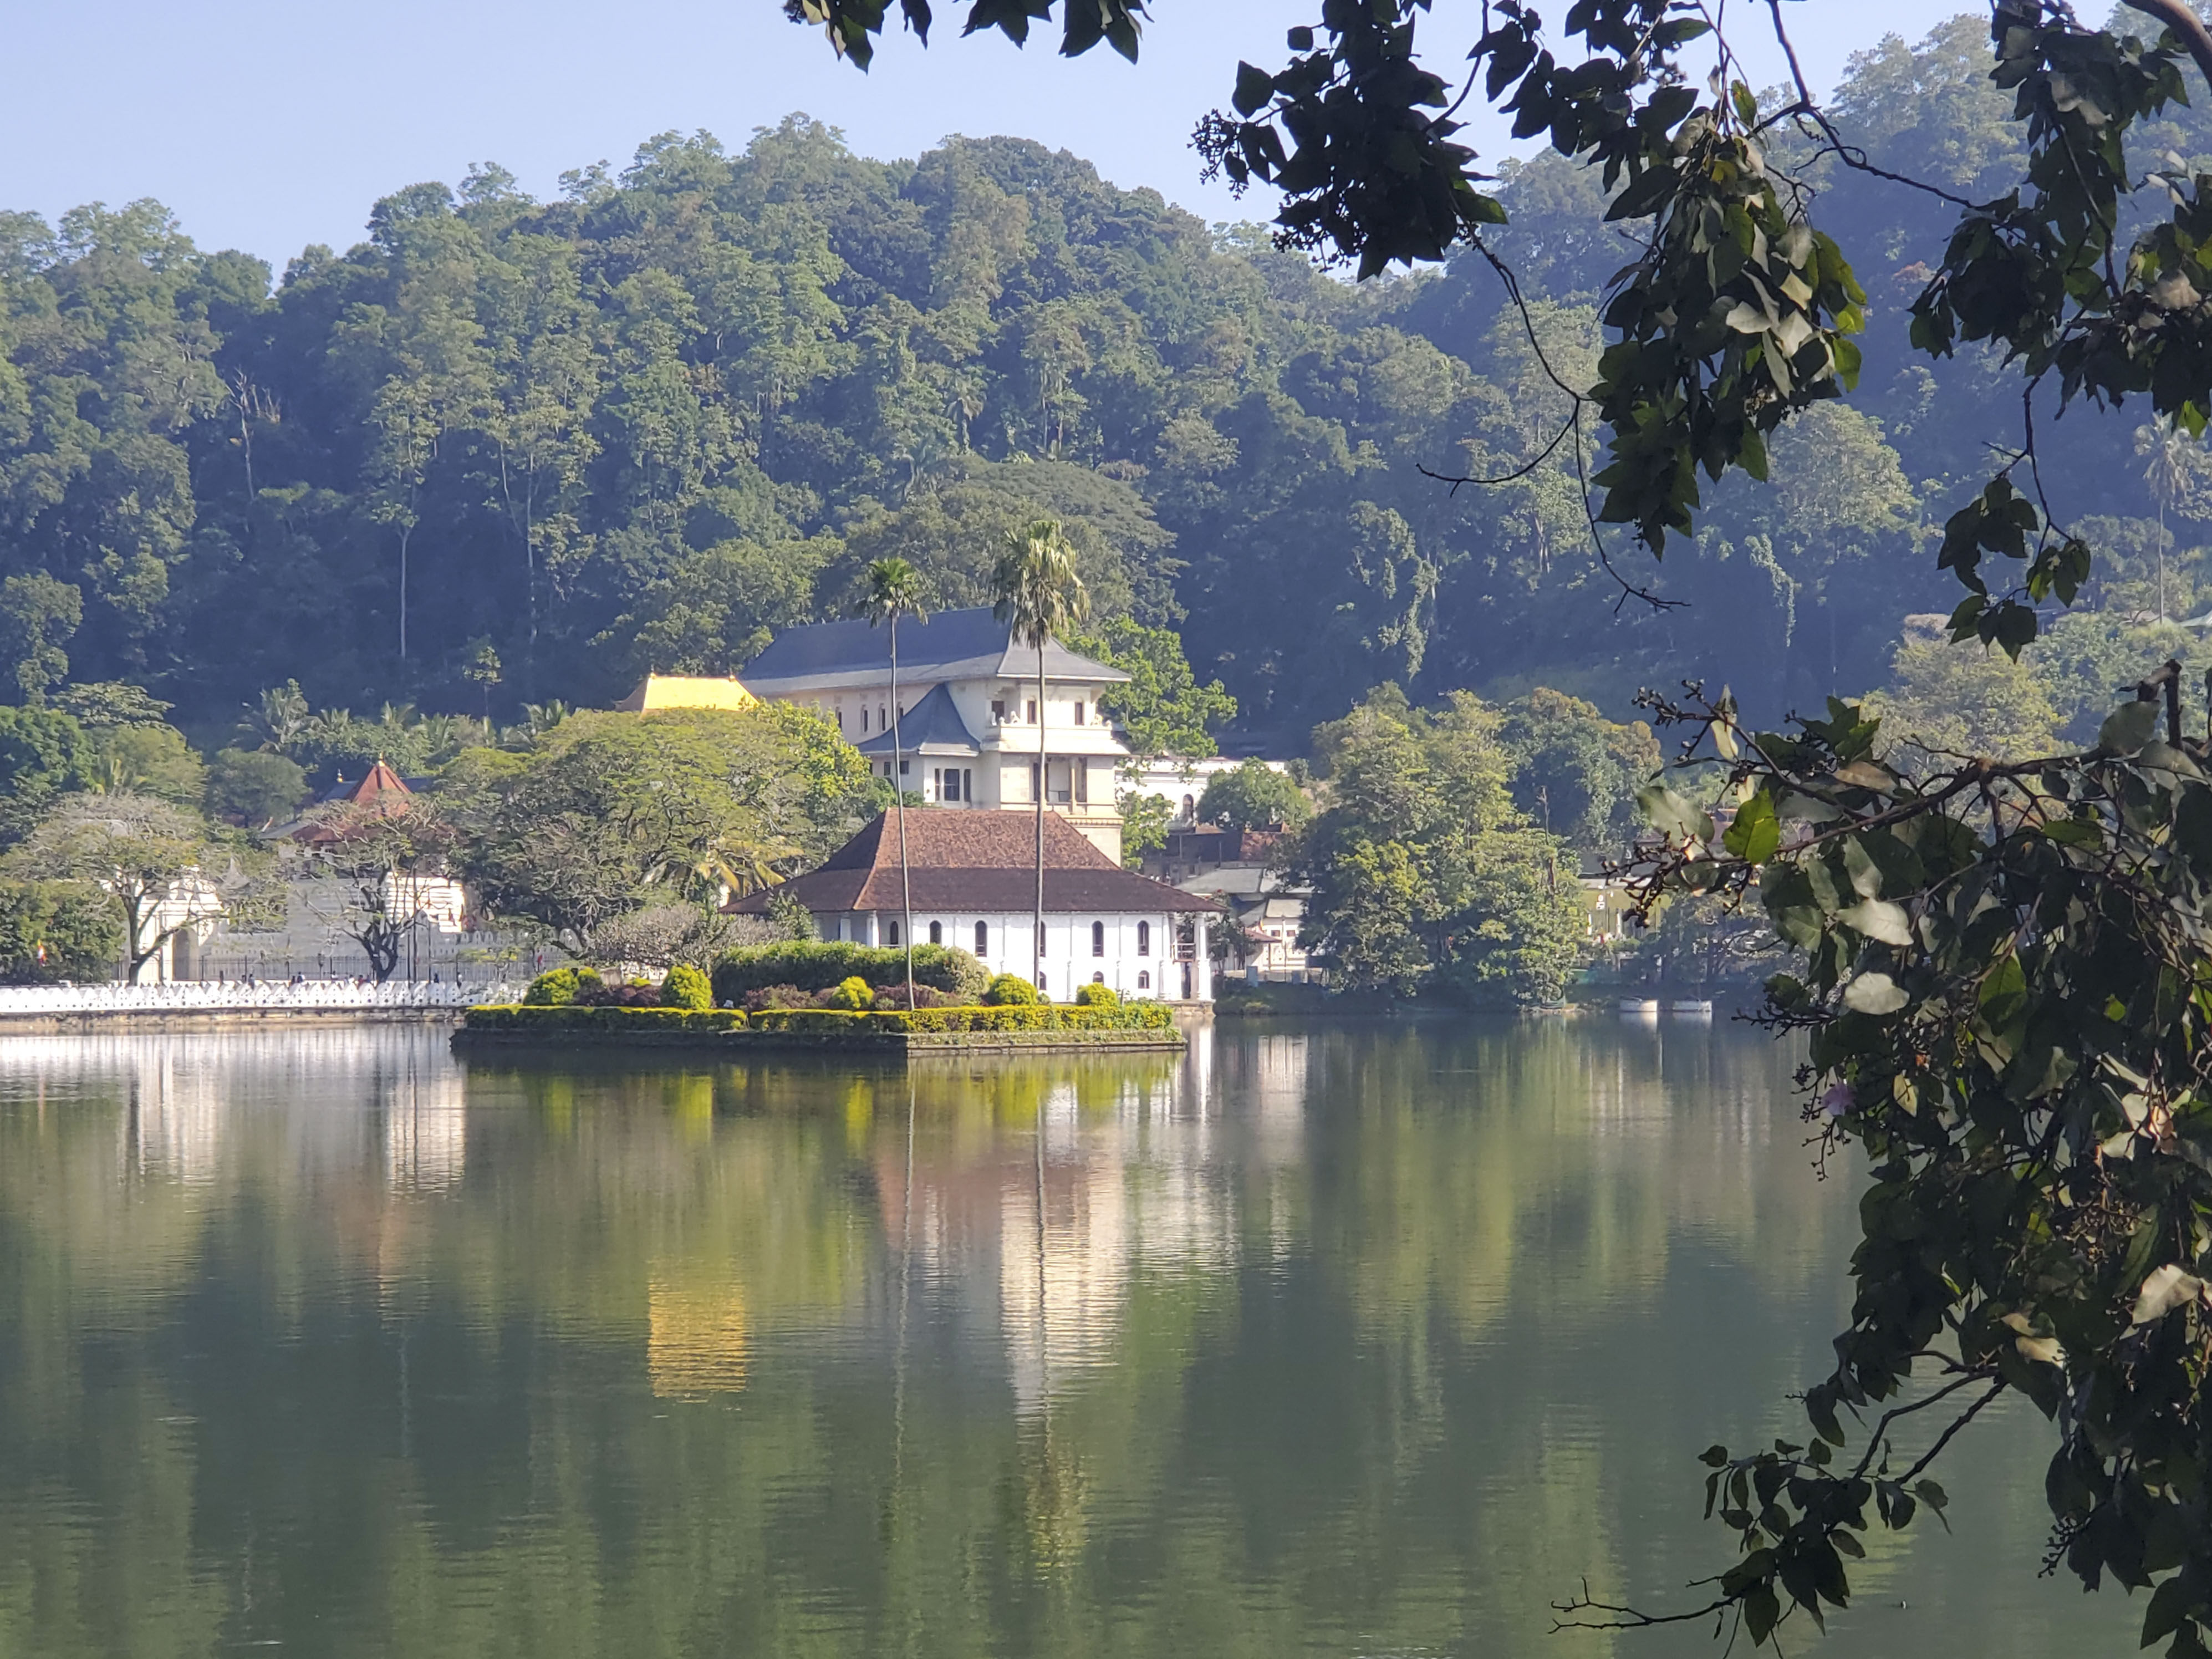 The story behind Hong Kong’s Southorn Playground can be traced back to early 20th century Sri Lanka. Above: The Royal Palace and Sea of Milk lake at Kandy. Photo: Stuart Heaver